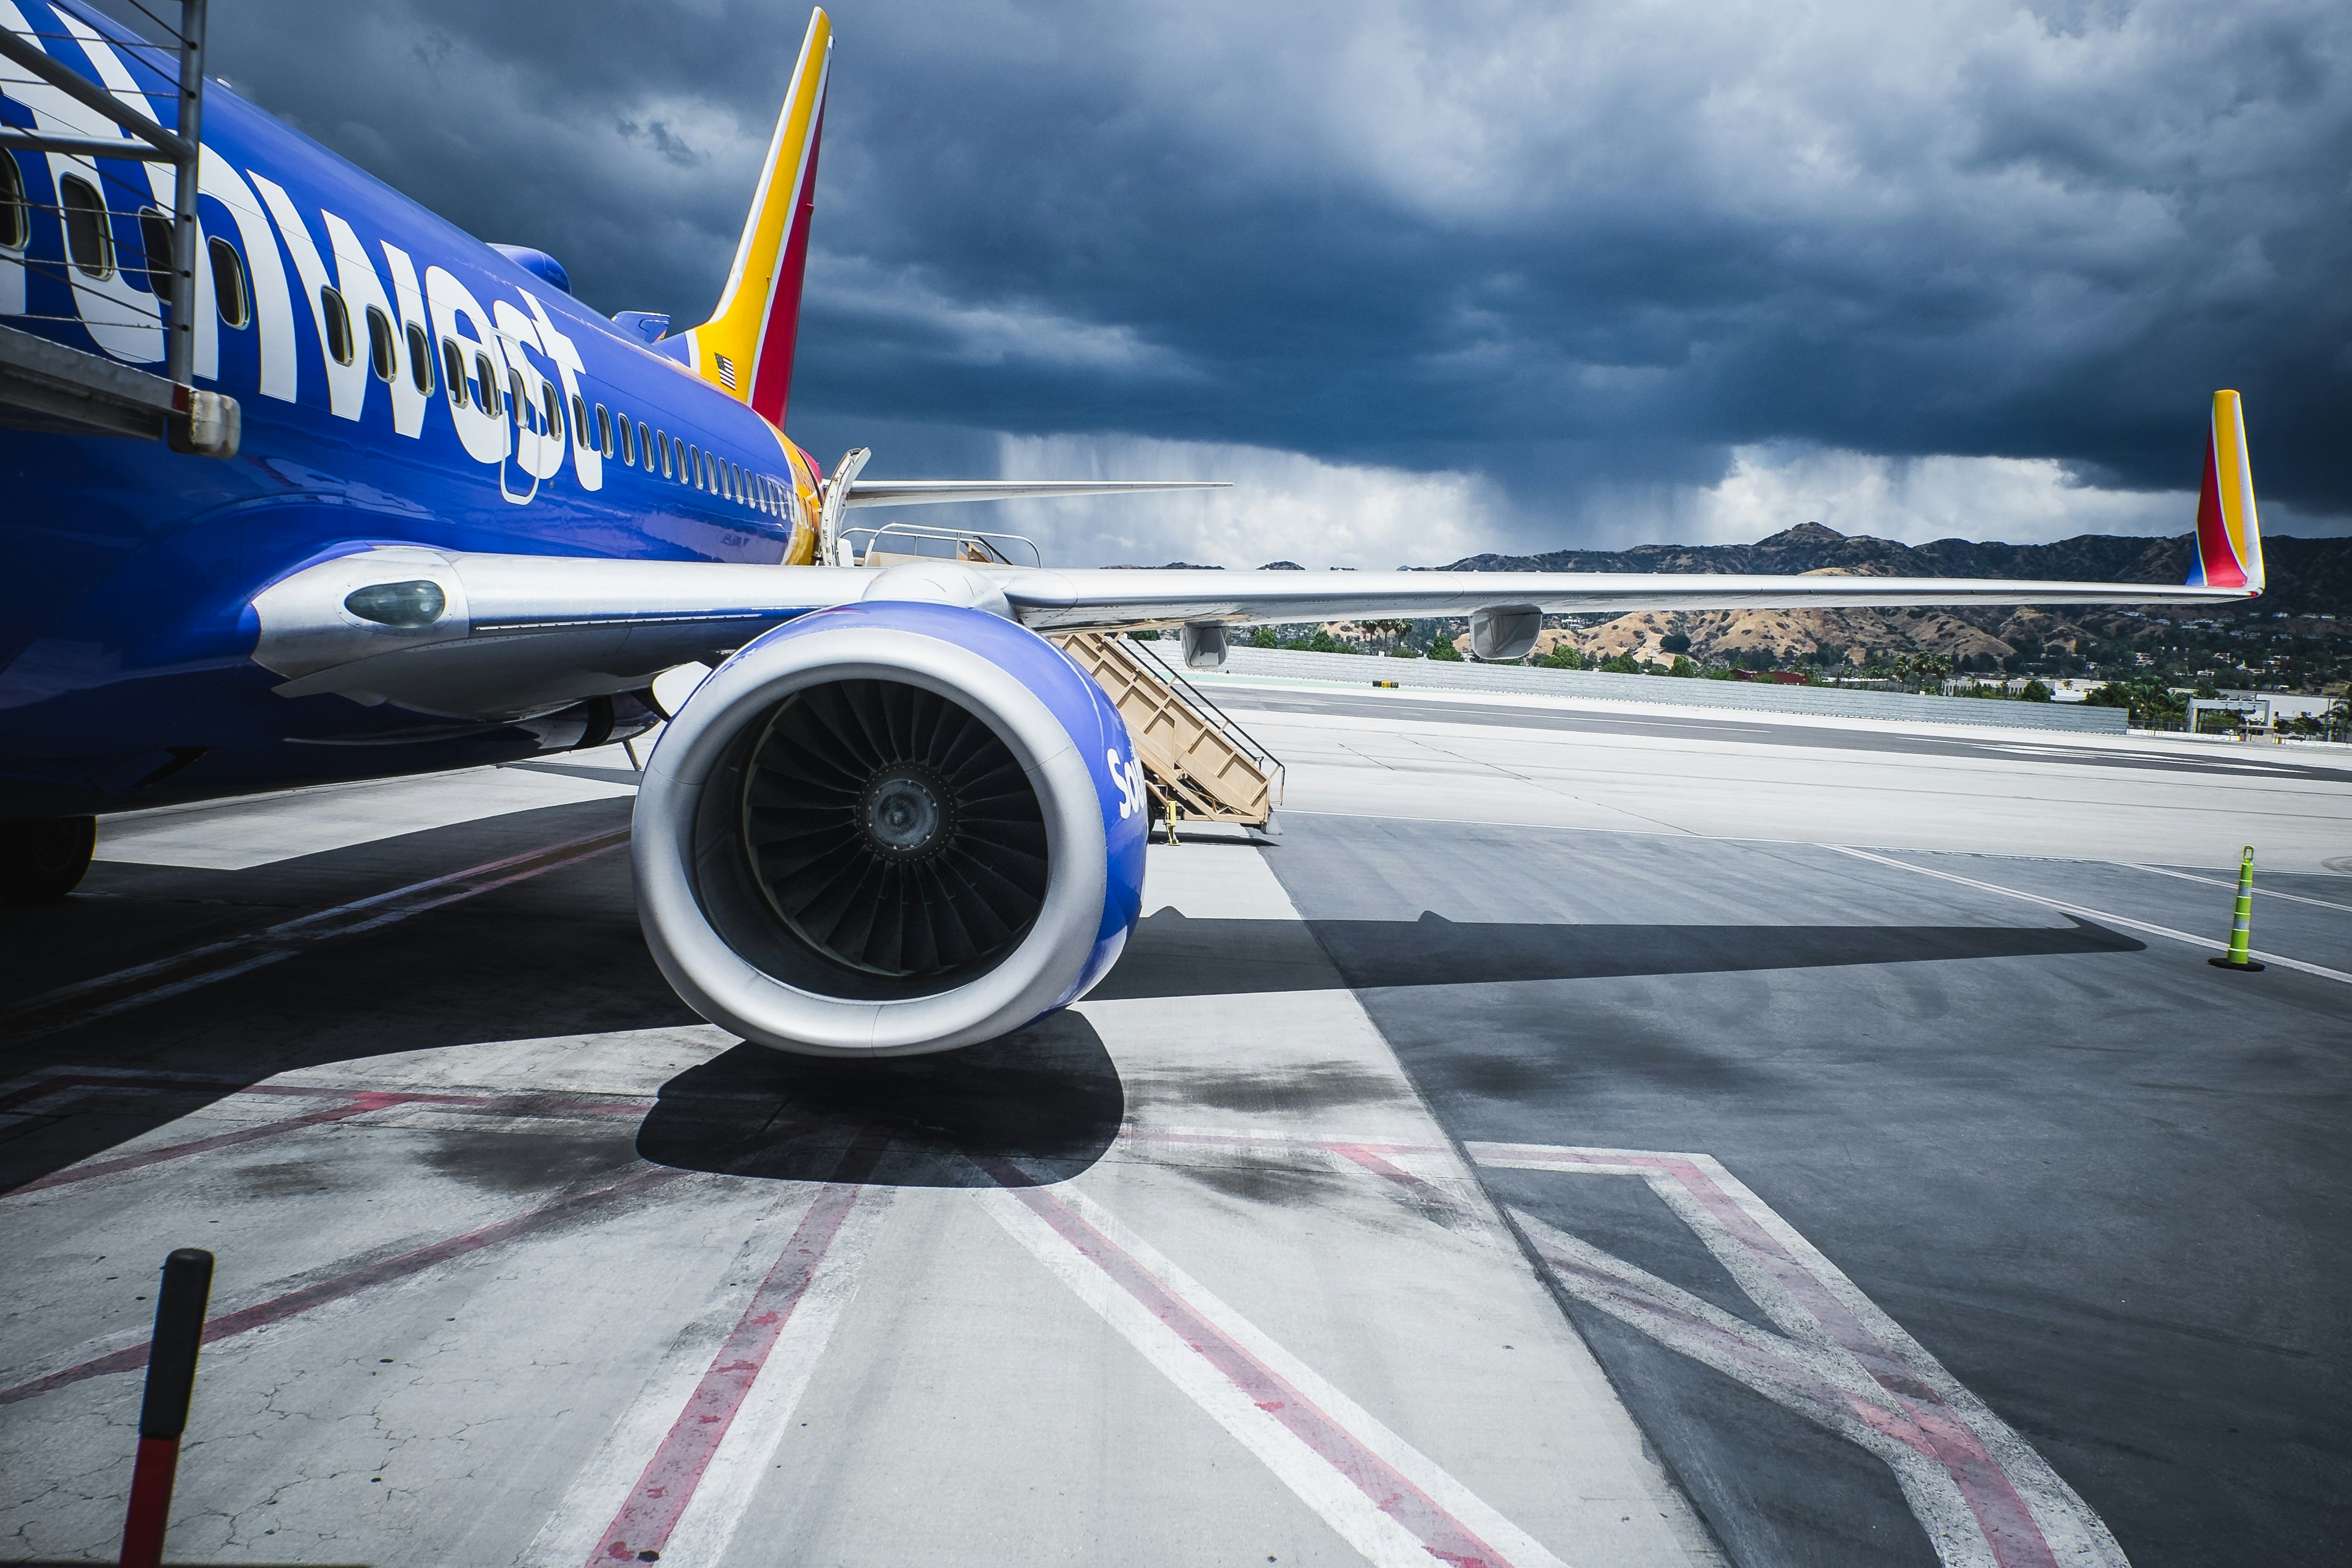 Southwest Airlines is one of many airlines that offers free airfares for medical travel.